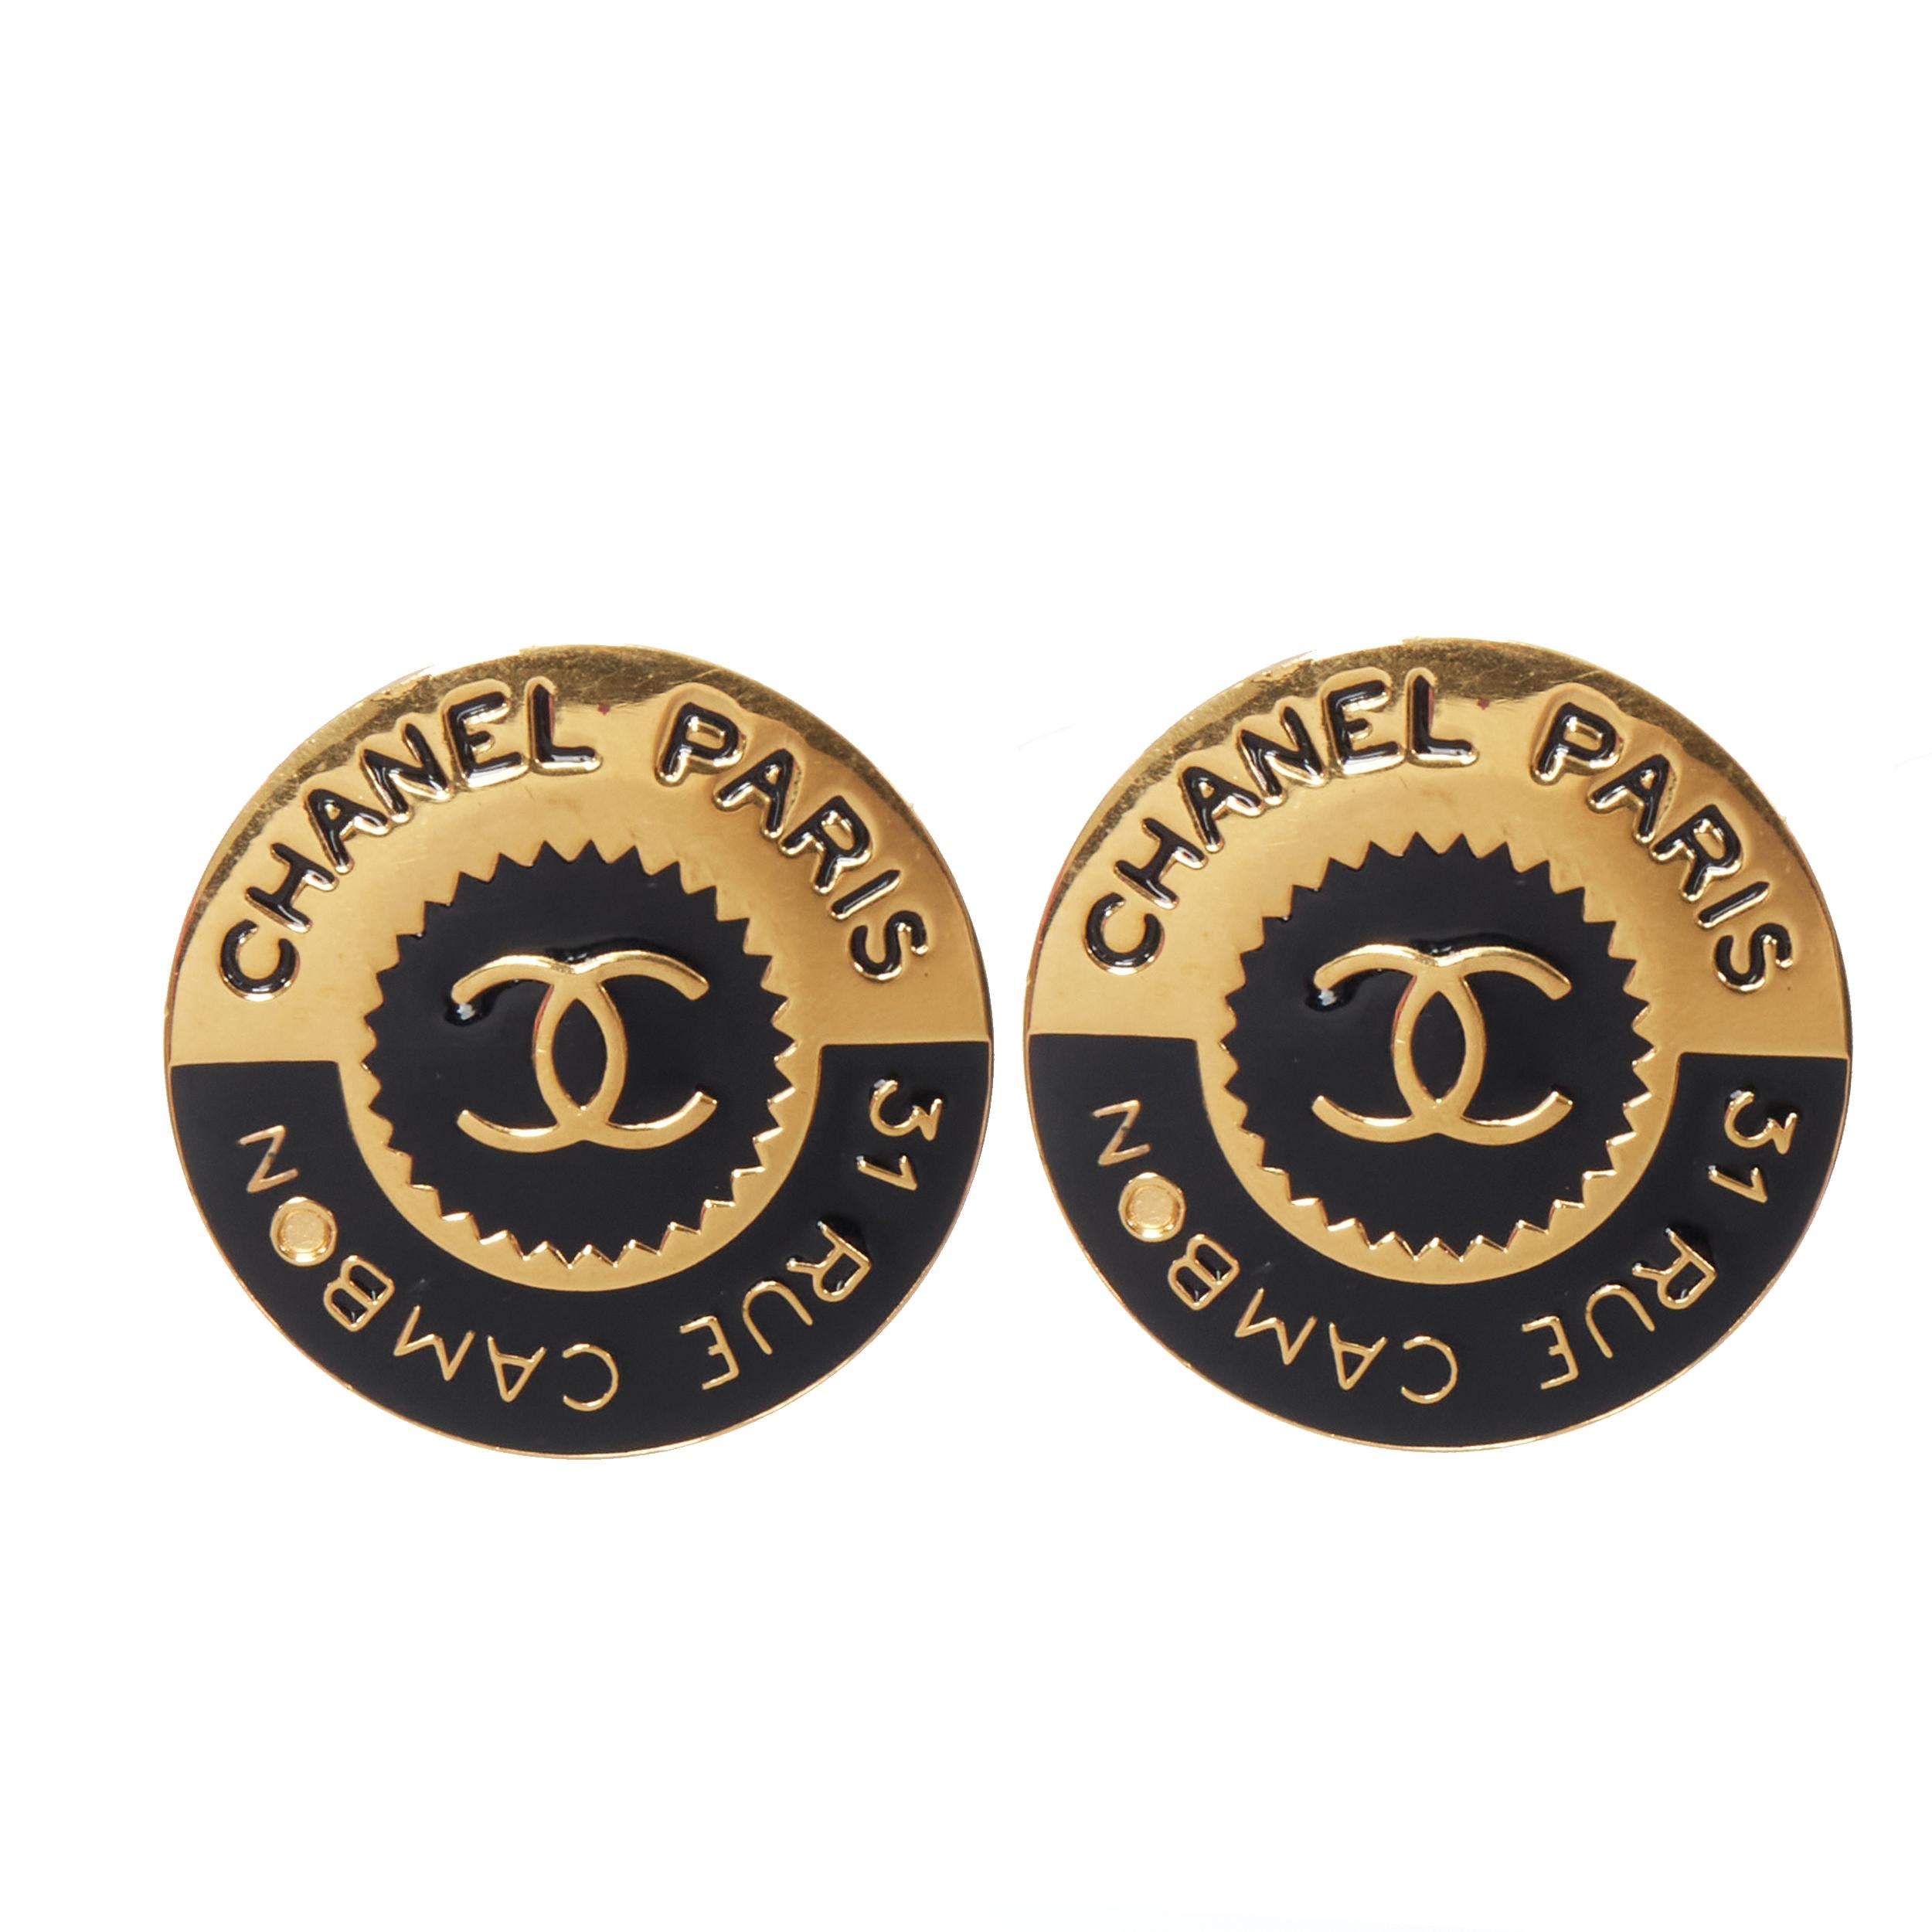 CHANEL Vintage 31 Rue Cambon logo stamp black gold statement disc earrings 
Reference: GIYG/A00232 
Brand: Chanel 
Designer: Karl Lagerfeld 
Material: Metal 
Color: Gold 
Pattern: Solid 
Closure: Clip on 
Extra Detail: CC 31 Rue Cambon logo.